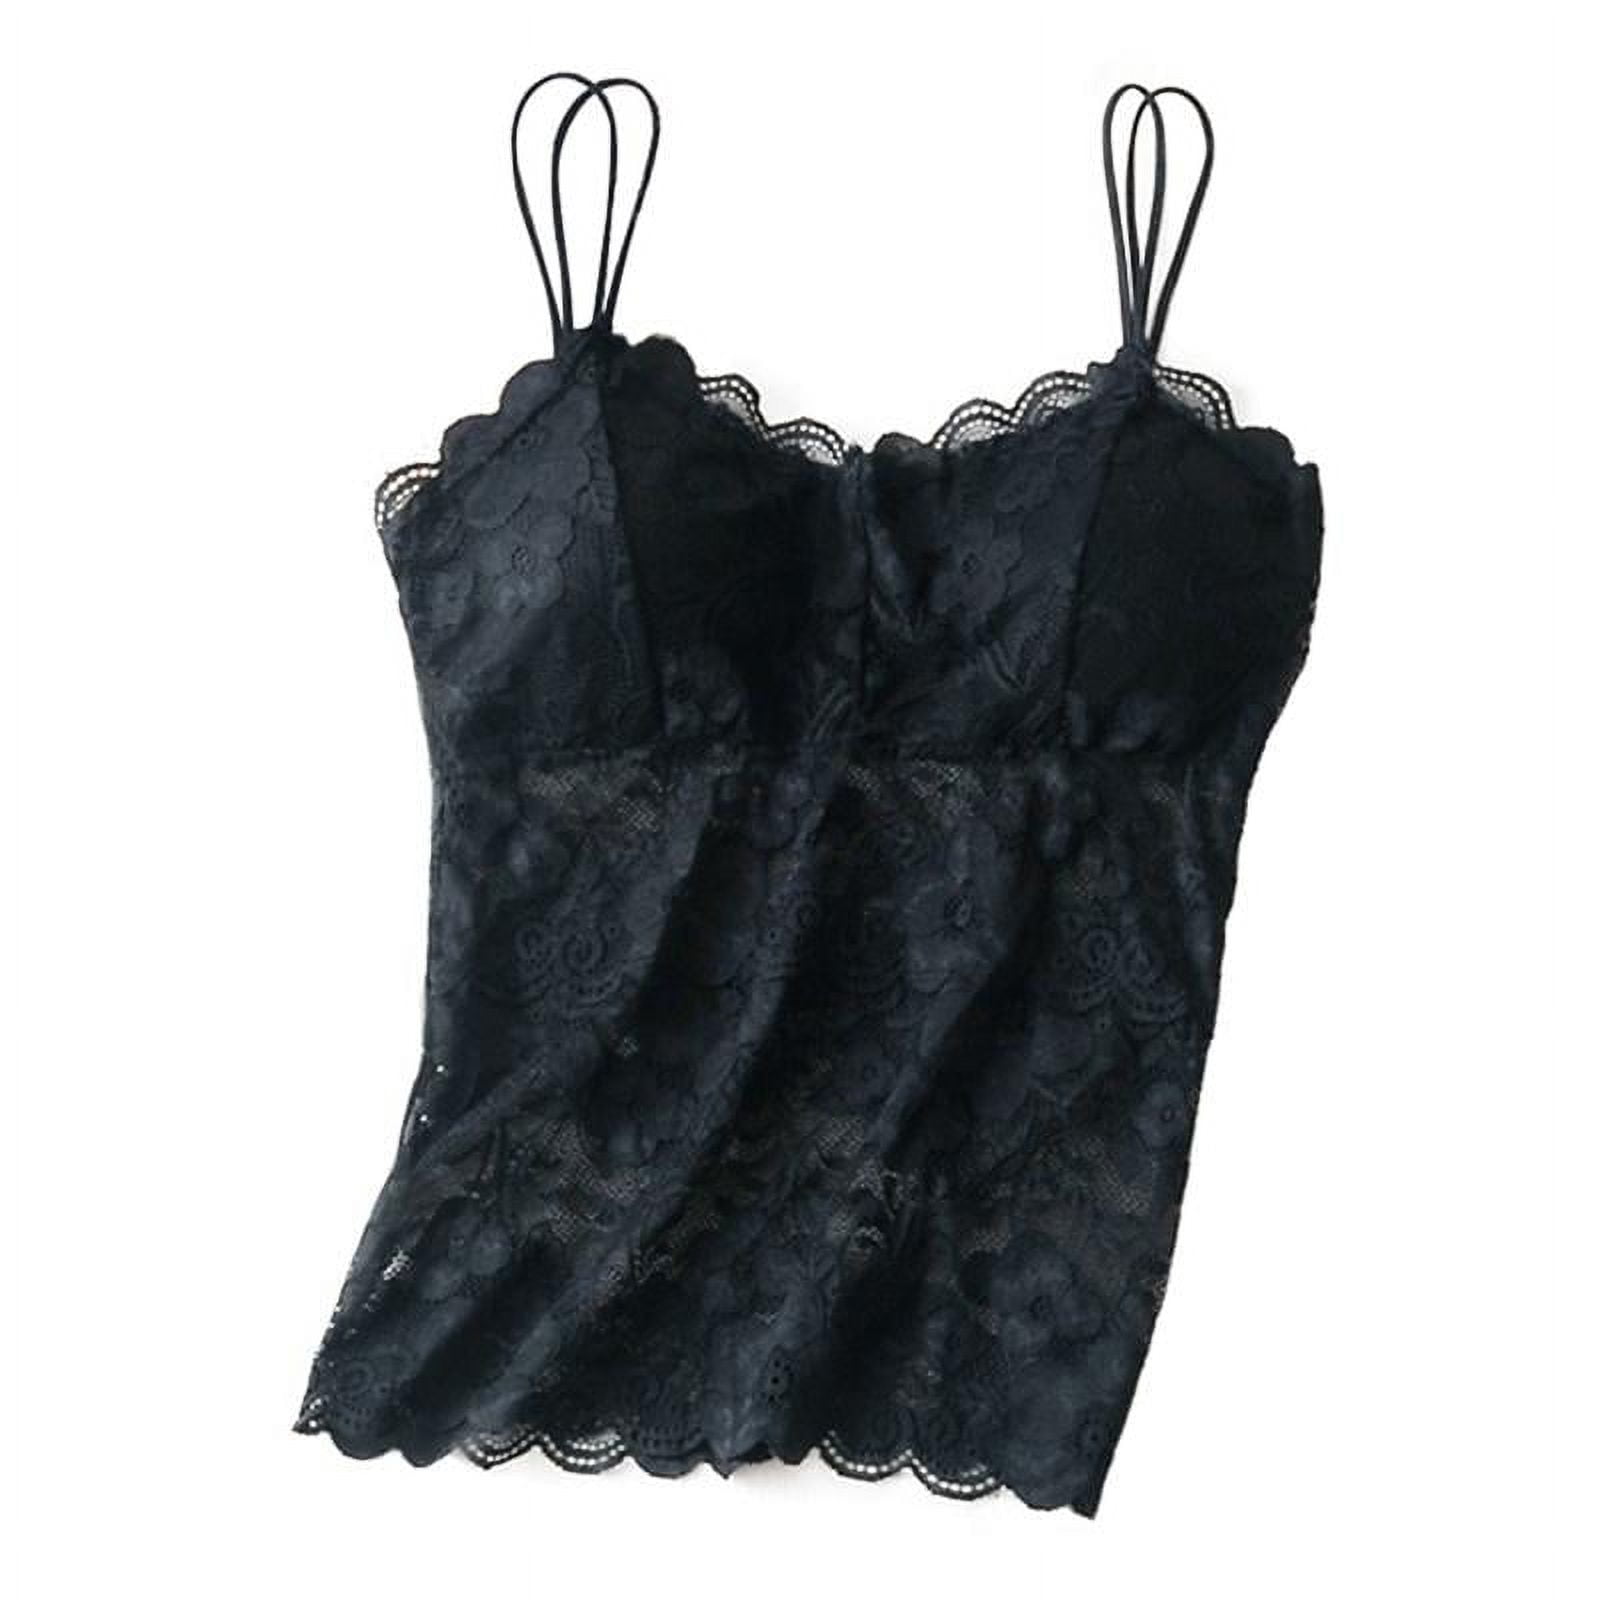 ThinktankHome Ladybranch Lace Tank Tops for Women Sexy V-Neck Cami Tops ...